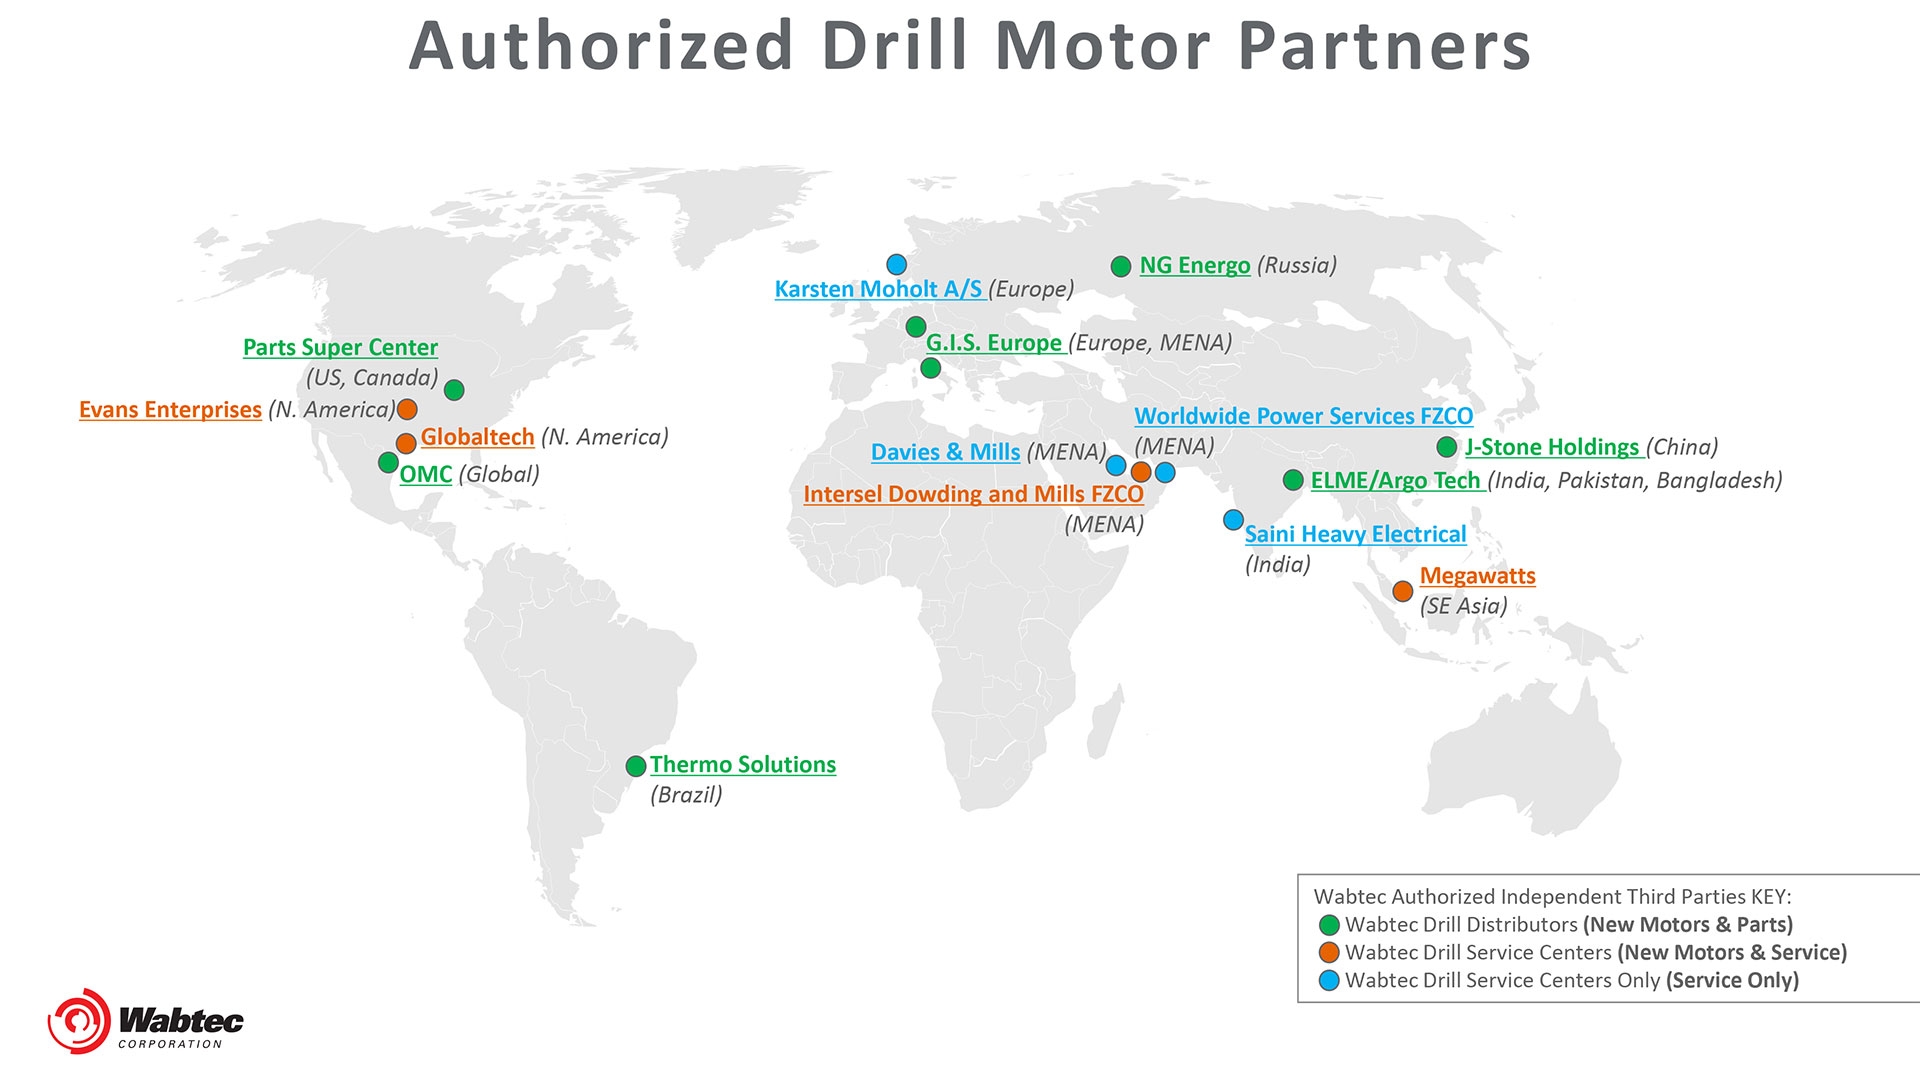 Wabtec Authorized Drill Motor Partners Map